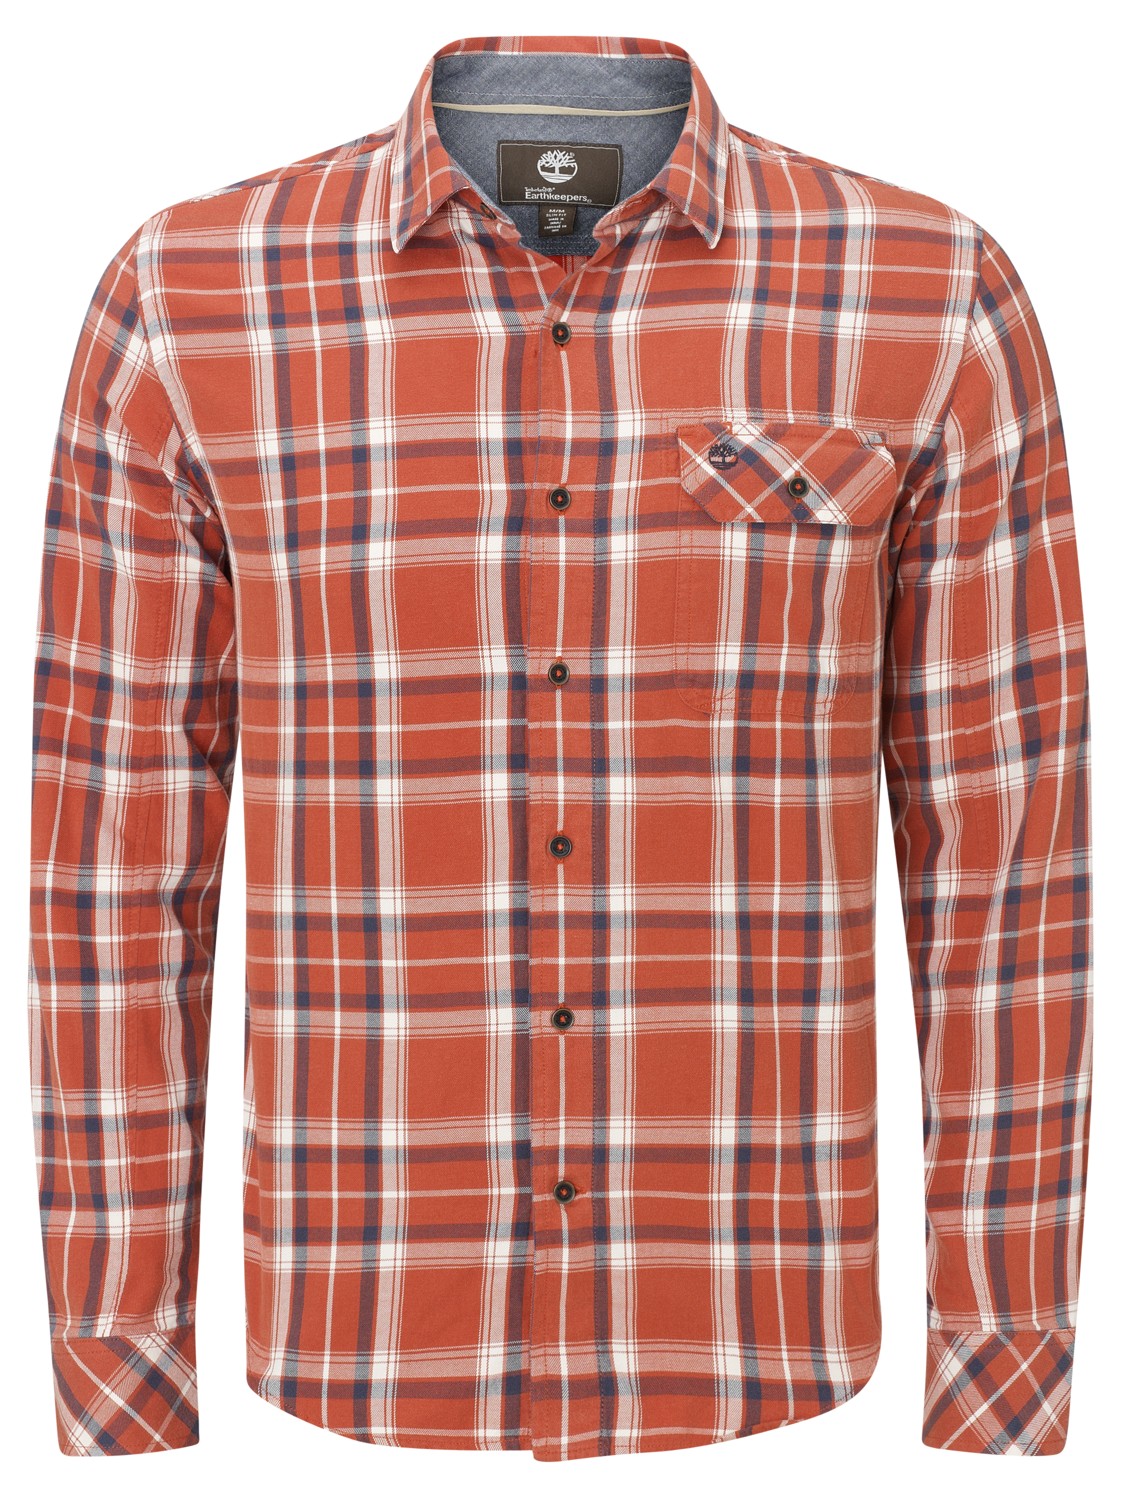 Lyst - Timberland Earthkeepers Allendale Check Shirt in Orange for Men